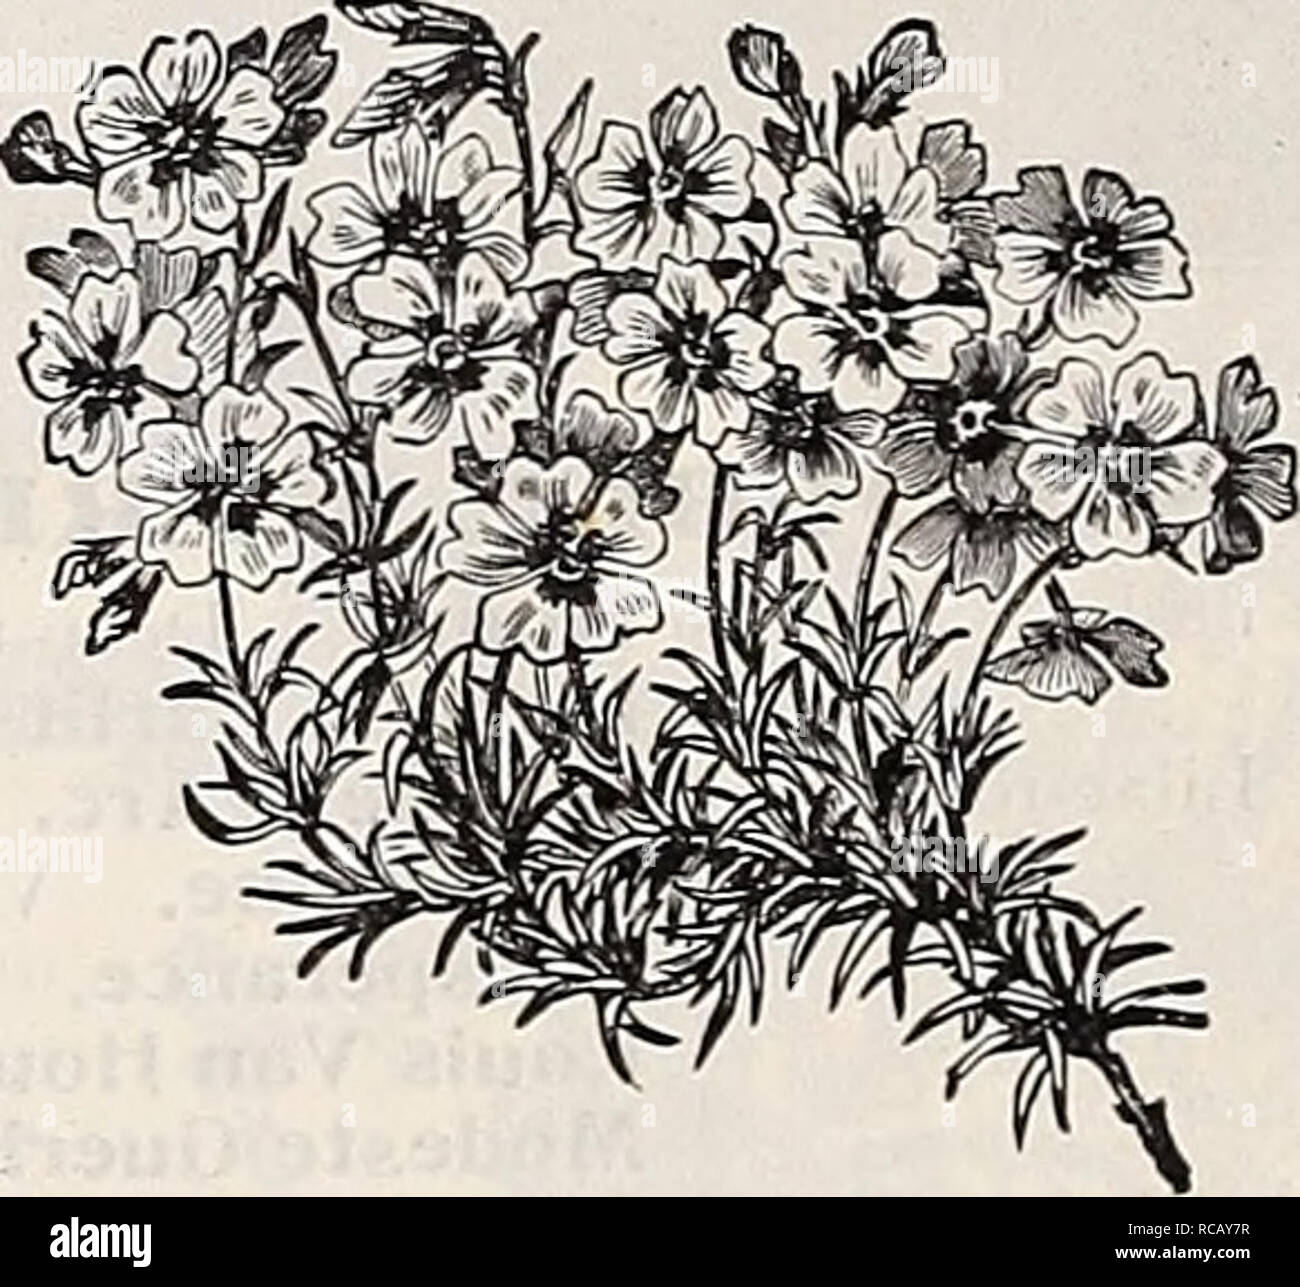 . Dreer's garden book : 1906. Seeds Catalogs; Nursery stock Catalogs; Gardening Equipment and supplies Catalogs; Flowers Seeds Catalogs; Vegetables Seeds Catalogs; Fruit Seeds Catalogs. Phlox Subulata. Pentstemon Sensaiion. PHI^OX AMCEIVA. This is one of the best varieties for carpet- ing the ground, the rockery or the border; it grows but 4 inches high, and in spring is a sheet of rich, bright pink flowers. 10 cts. each ; $1.00 per doz.; $6.00 per 100. PHI.OX CAROI.INA. A dwarf-growing species, rarely exceeding 12 inches in height, and producing during May and June masses of bright rosy-red f Stock Photo